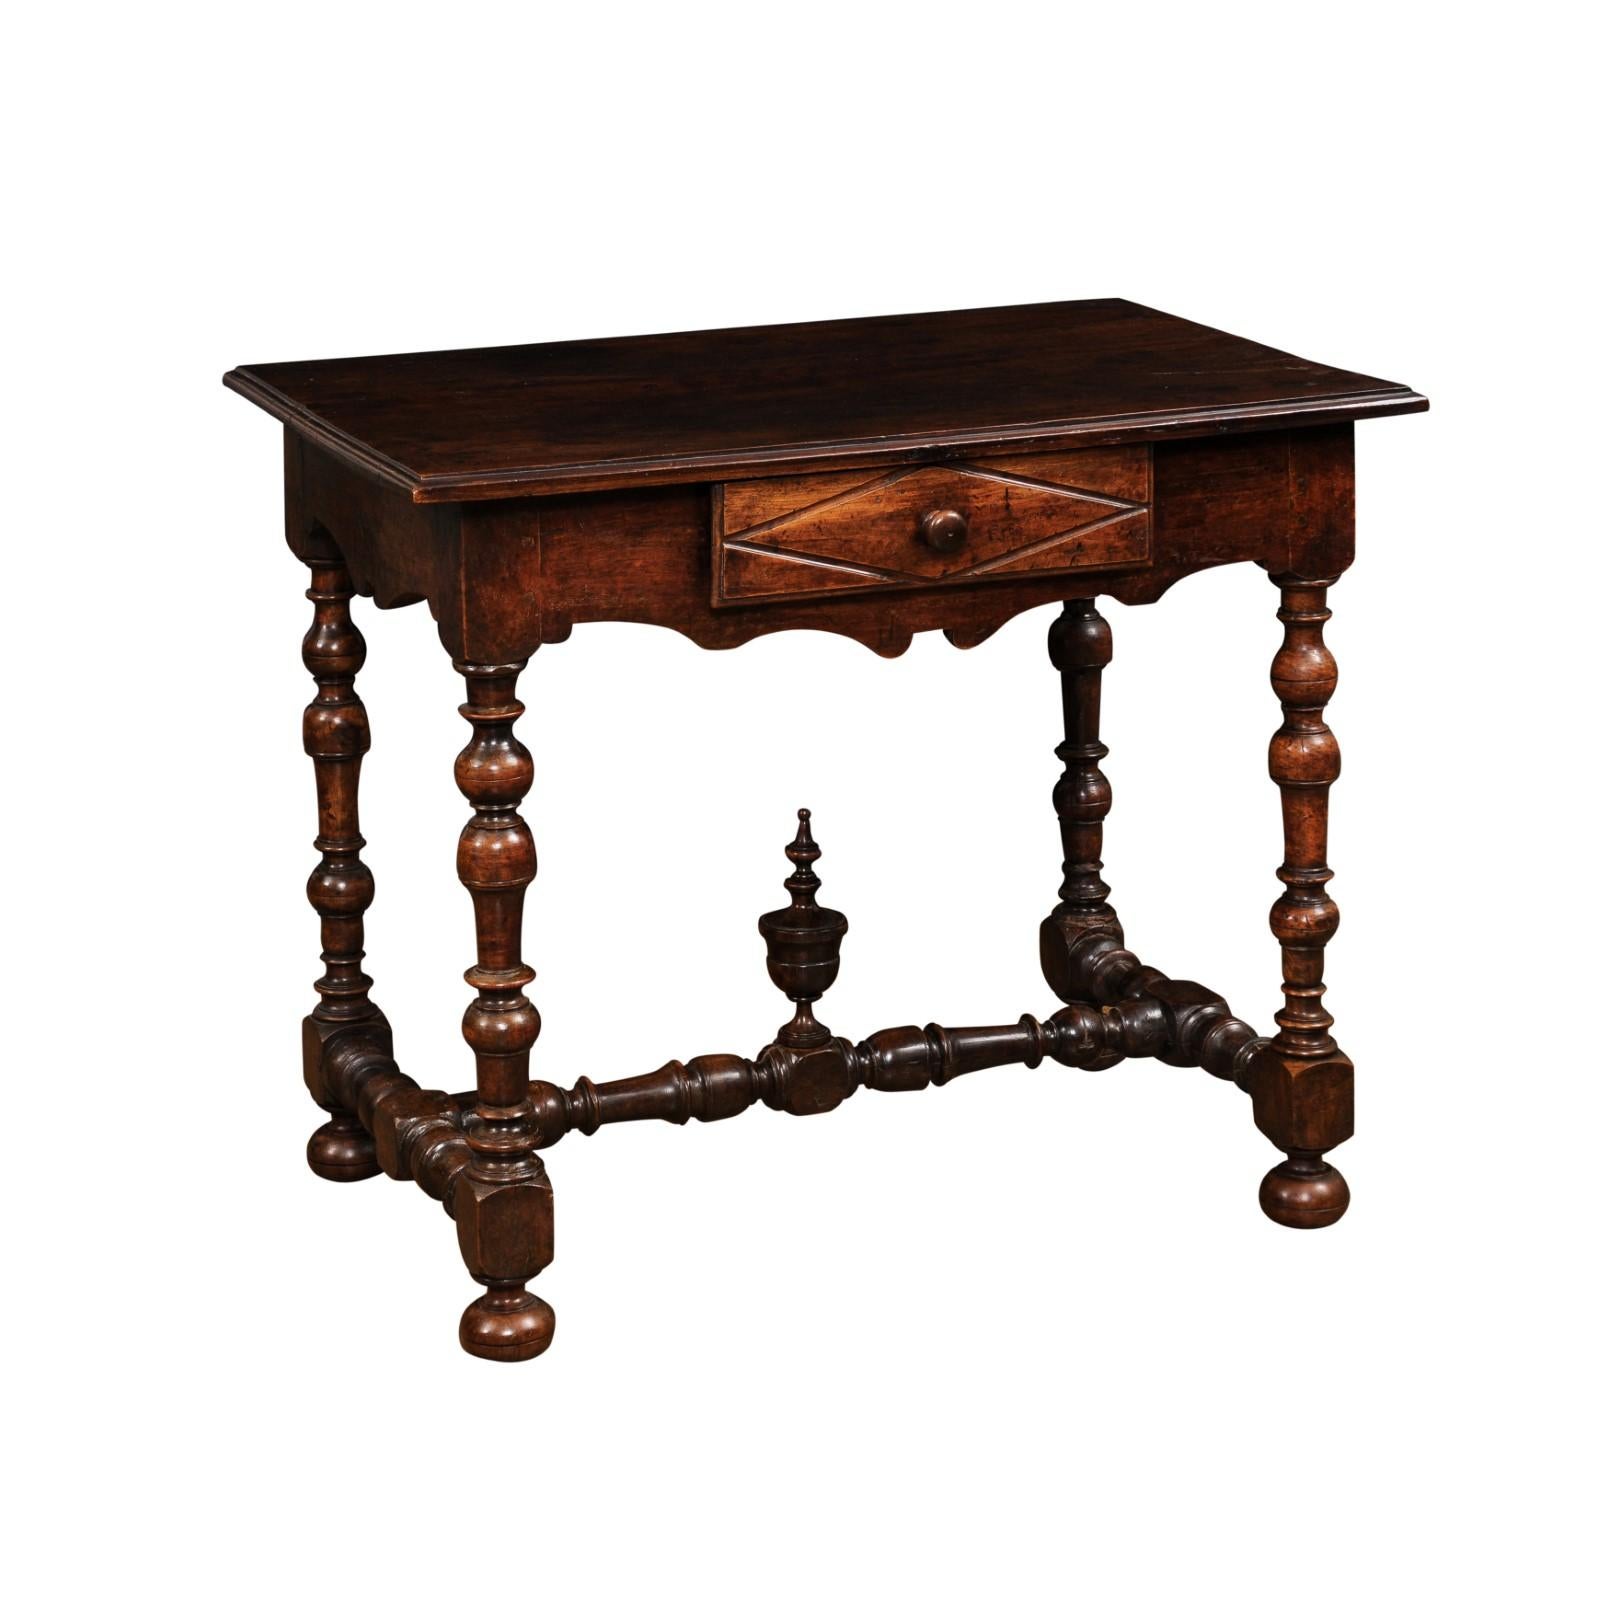 A French Louis XIII period walnut side table from the 17th century, with single drawer, carved diamond motif, turned baluster legs, cross stretcher of similar style with carved finial and mounted on bun feet. This French Louis XIII period walnut